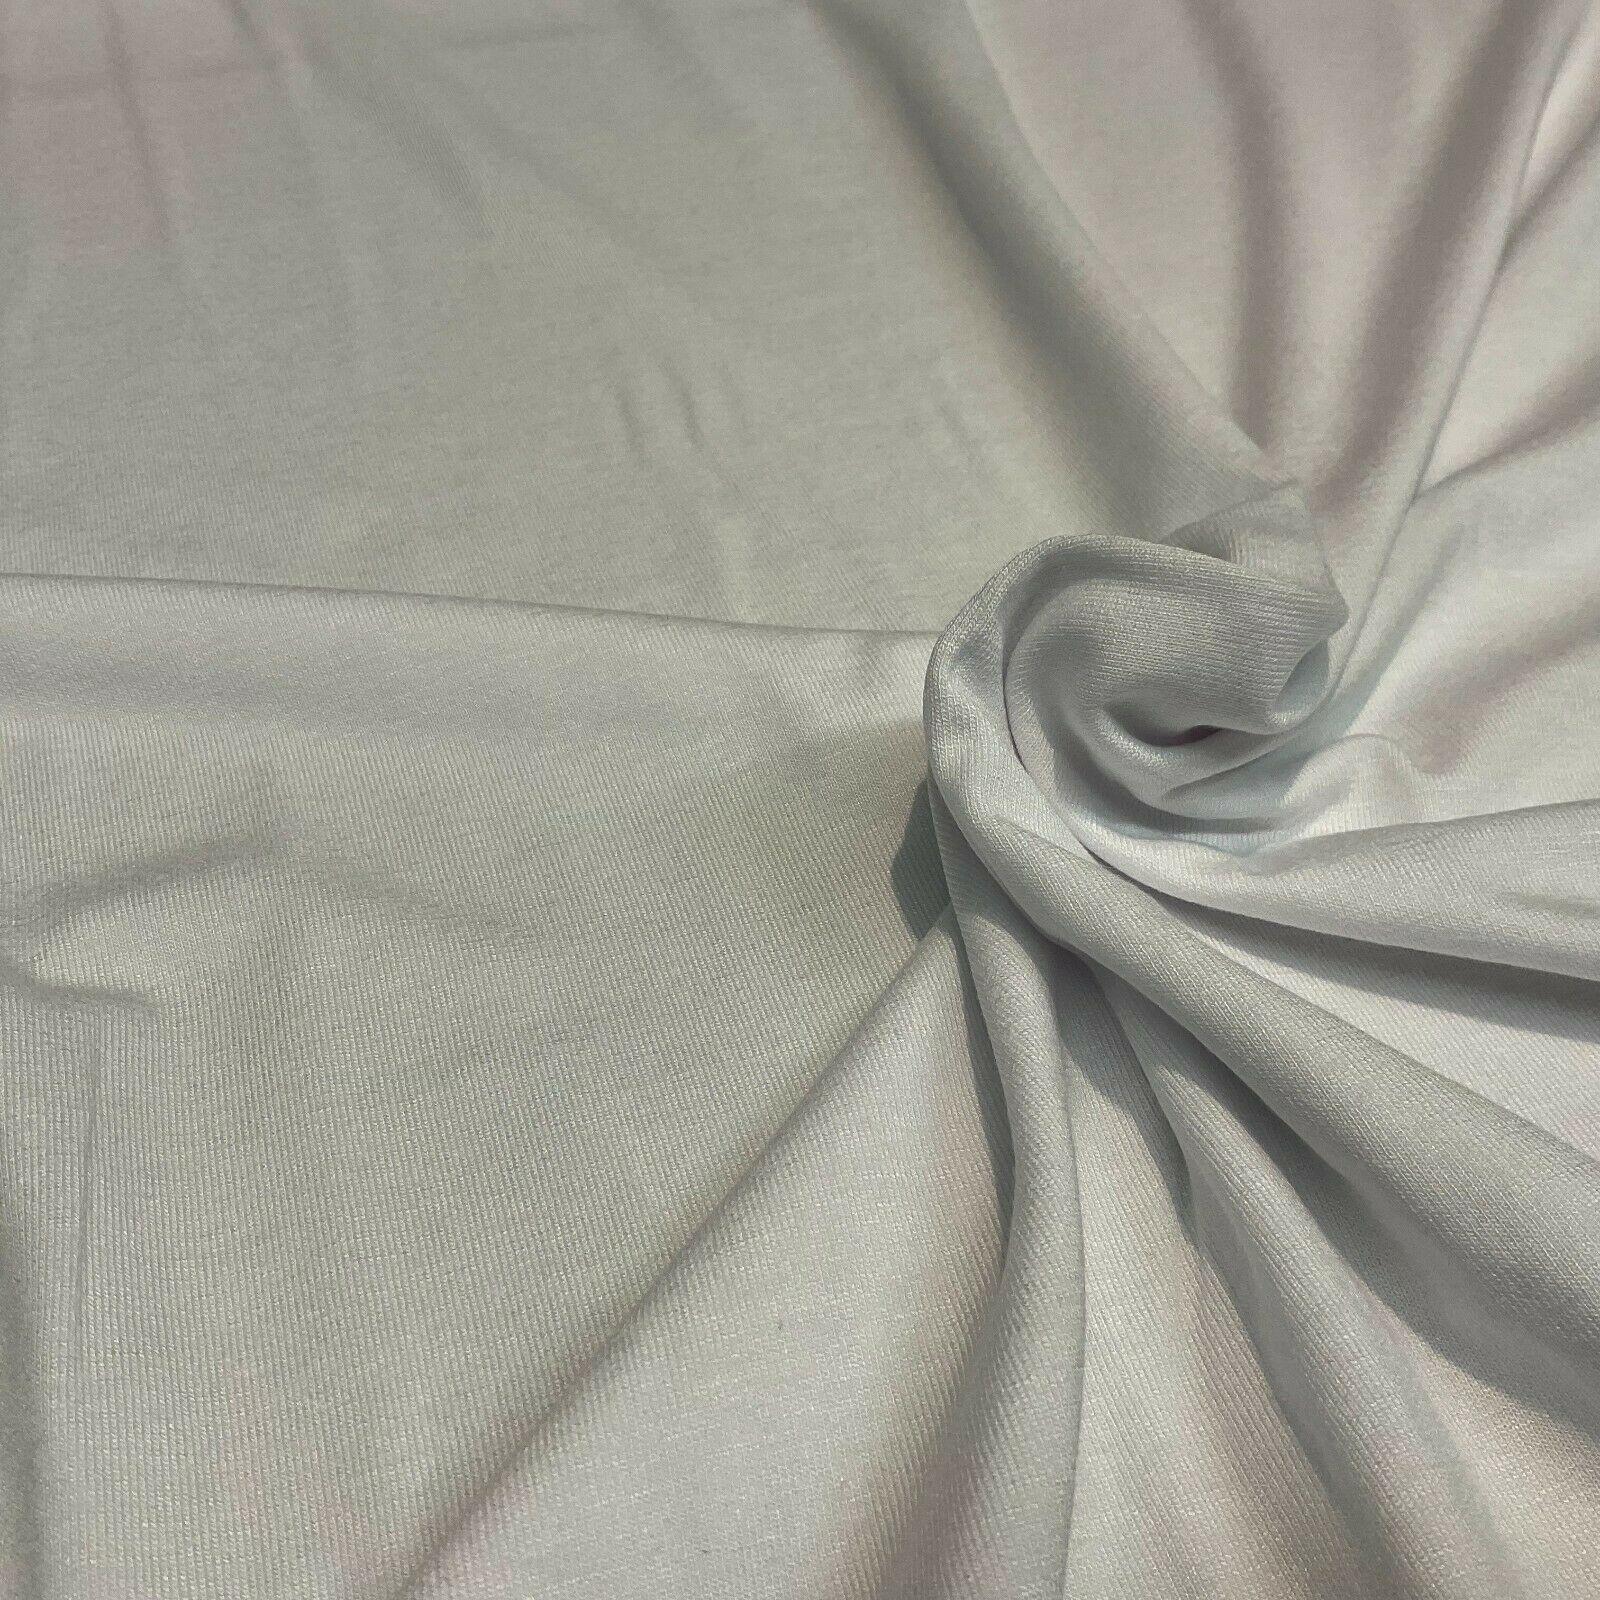 Plain Stretch Jersey Viscose ideal for tops t-shirts, dress fabric 58cm M1589